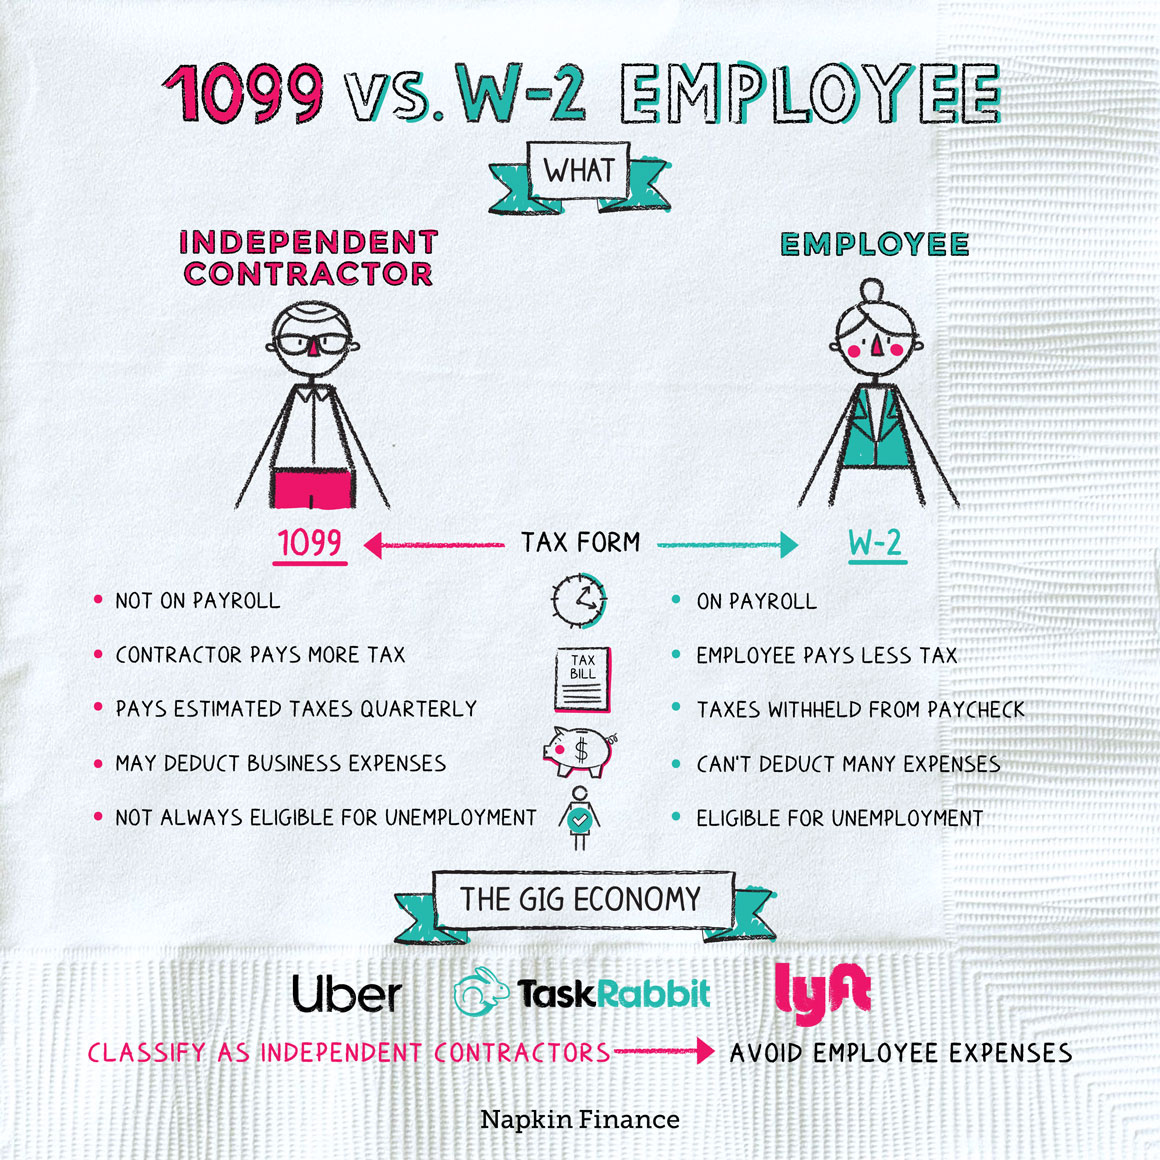 What Is A 1099 Vs W-2 Employee? – Napkin Finance for W2/1099 Form